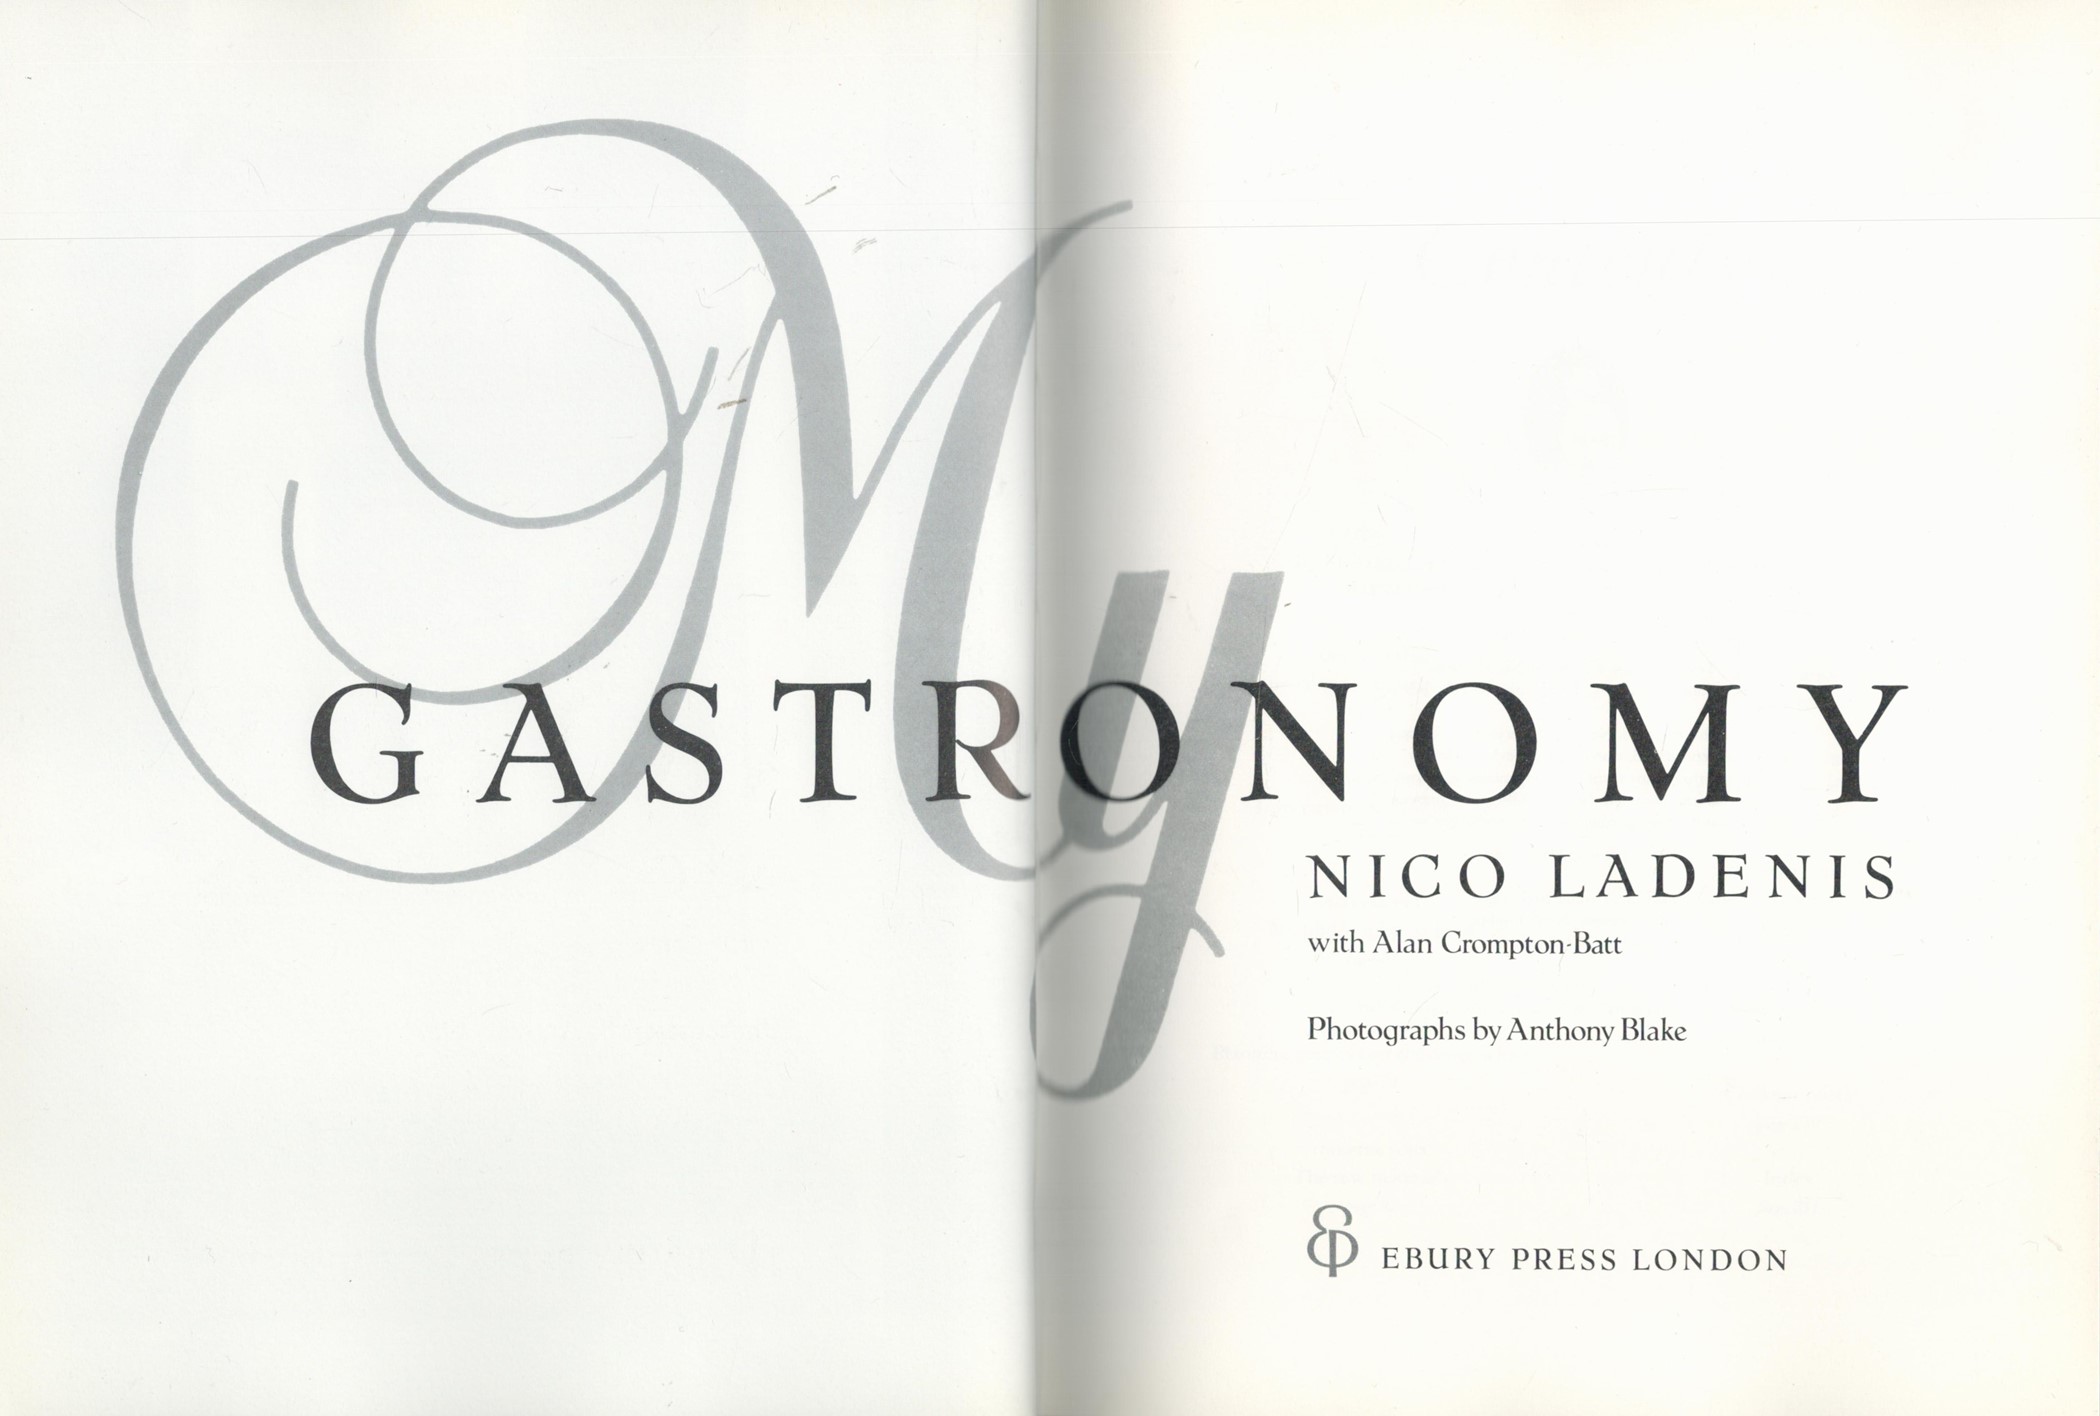 My Gastronomy by Nico Ladenis 1987 First Edition Hardback Book with 256 pages published by Ebury - Image 2 of 3